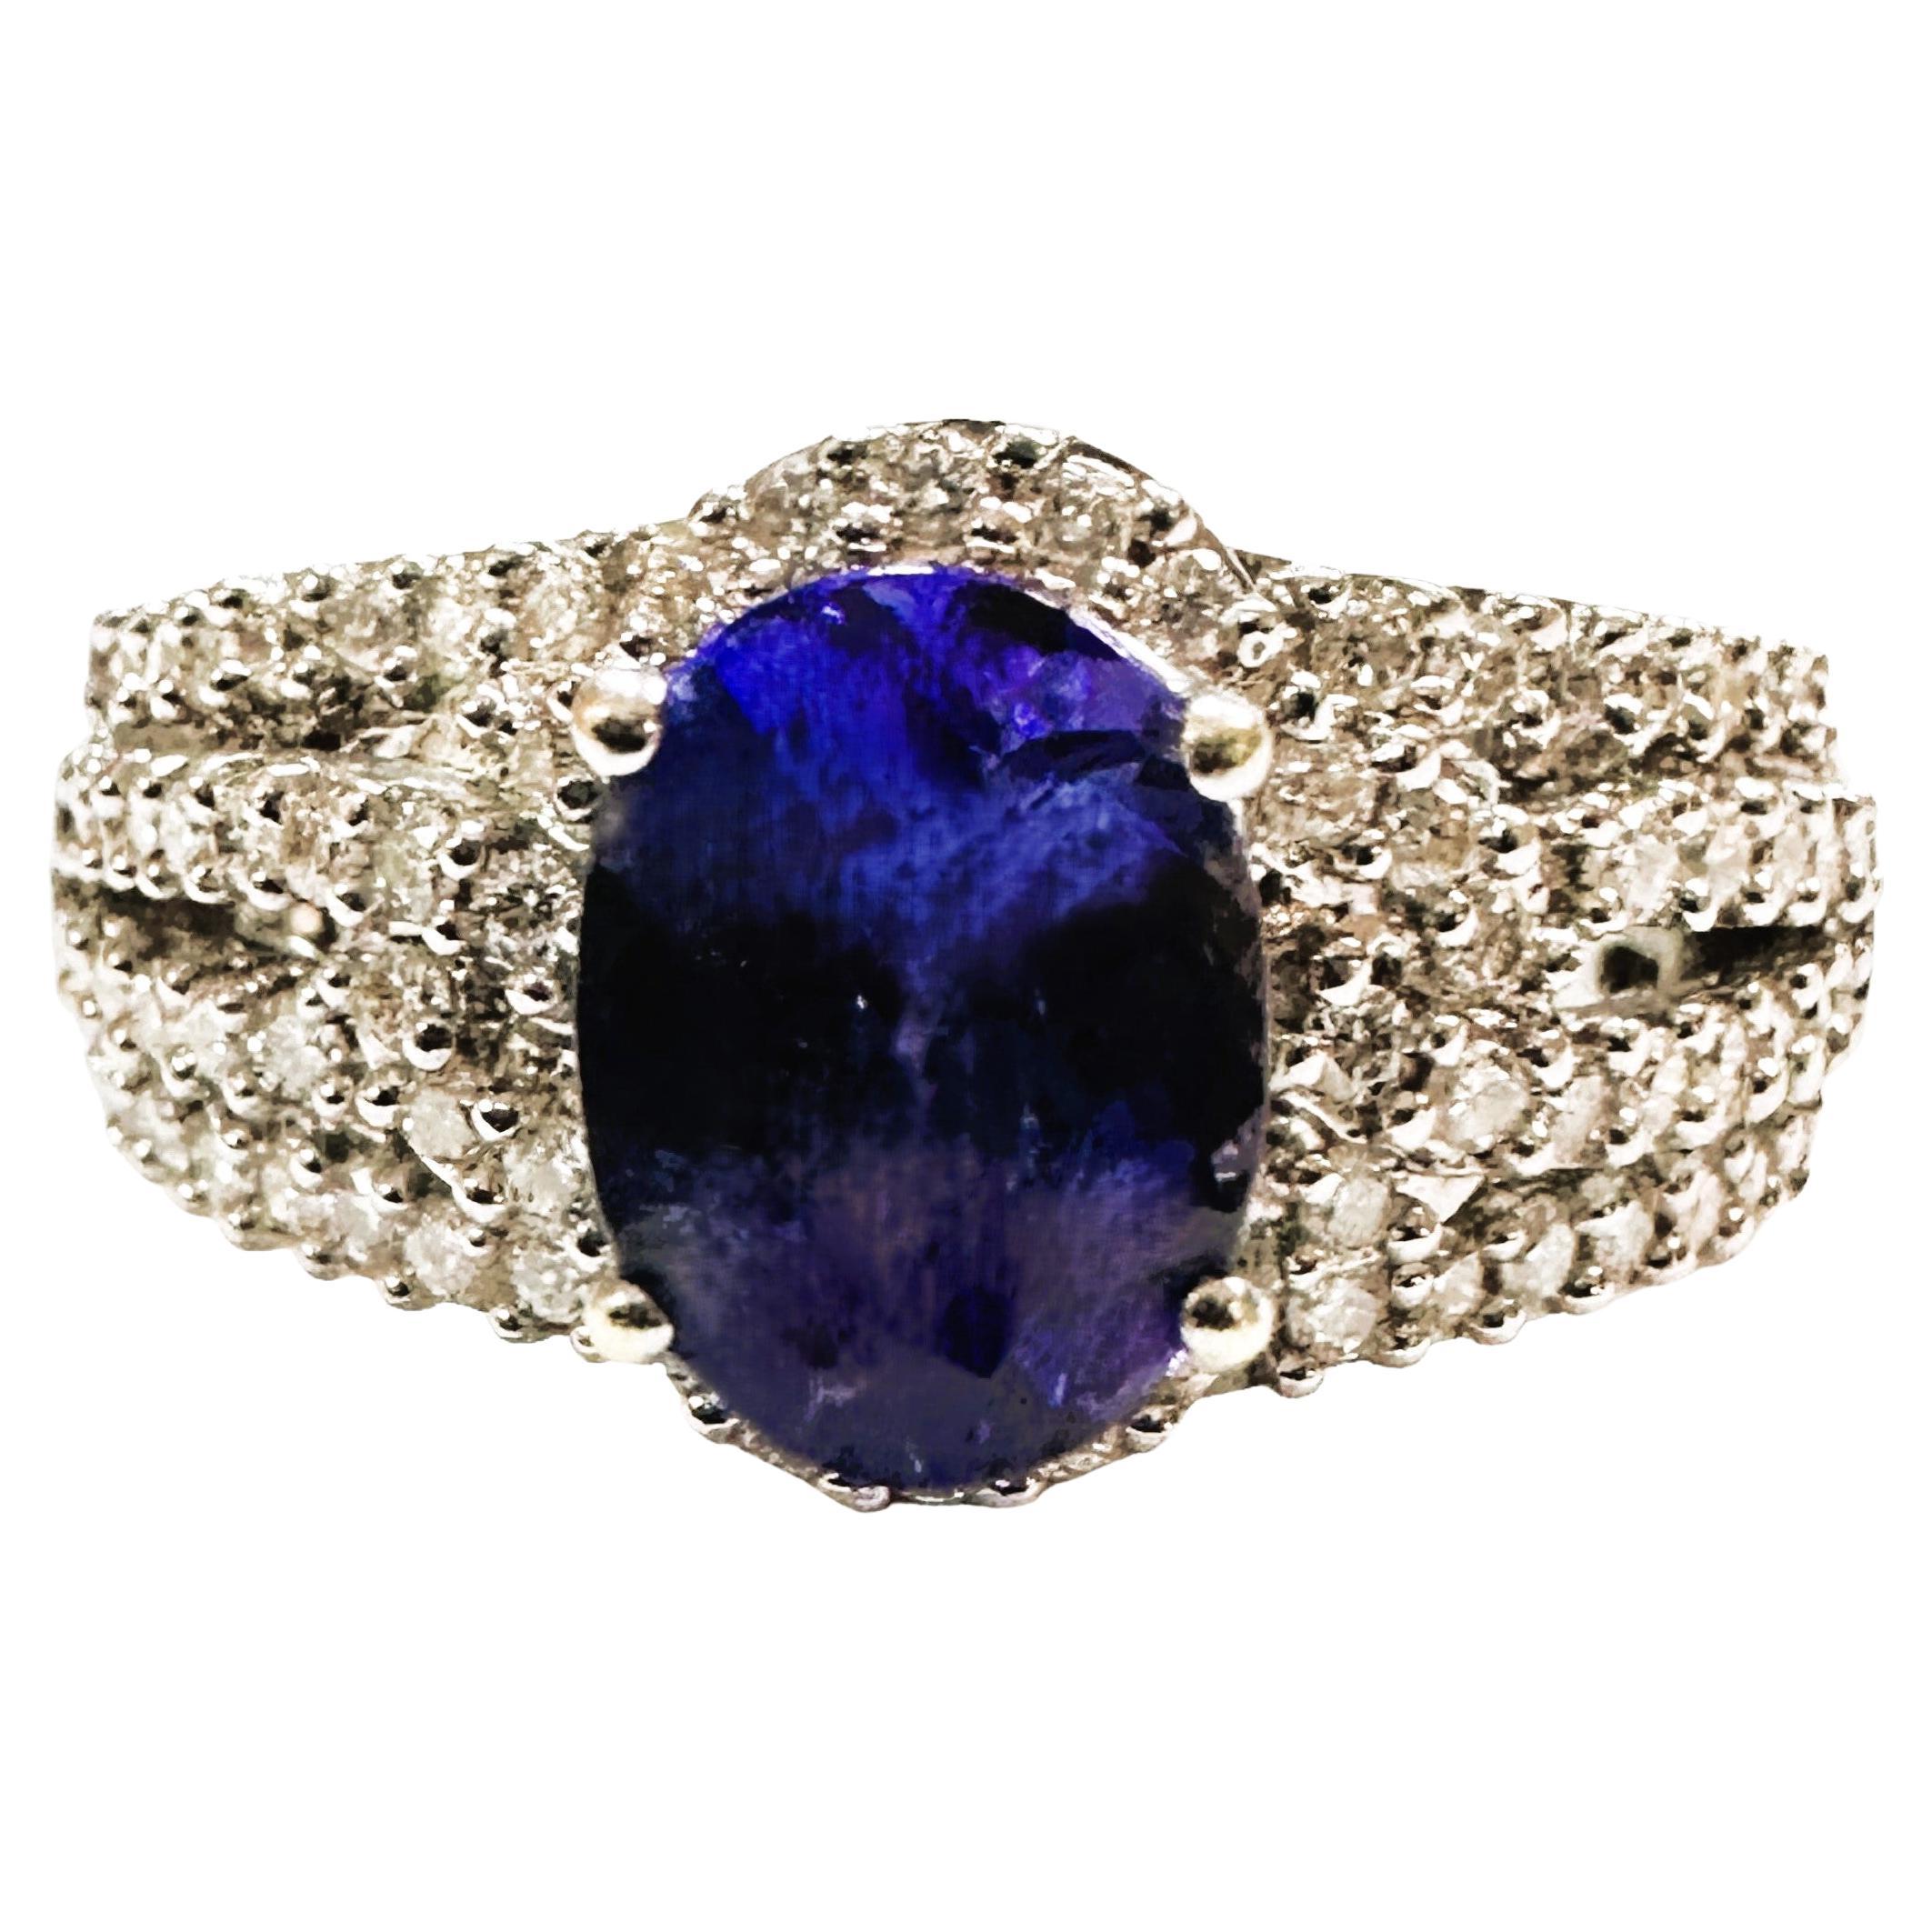 18K WG 1 Carat Oval Cut Tanzanite Ring with 3/4 CTTW Diamonds with Appraisal For Sale